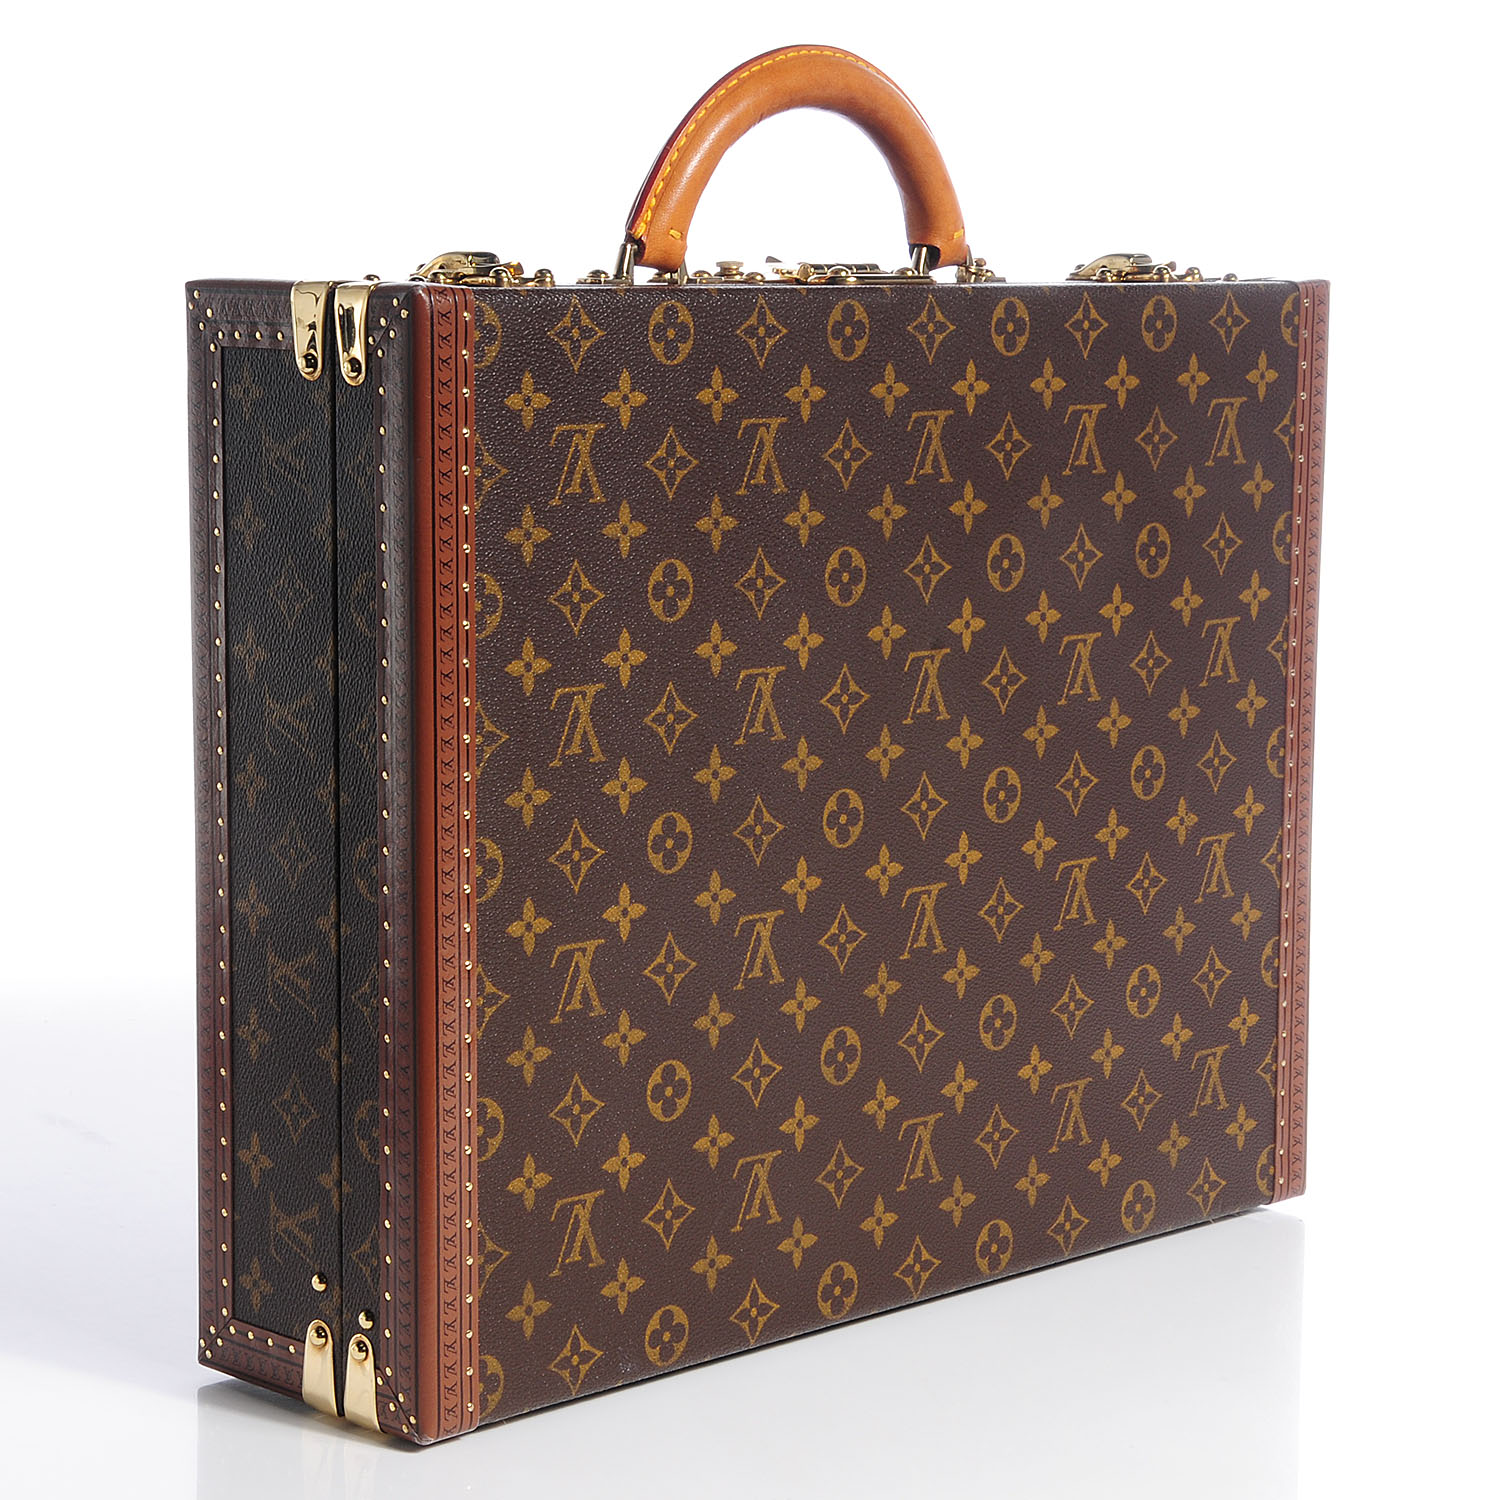 Sold at auction Louis Vuitton President Monogram Briefcase Auction Number  2698B Lot Number 488